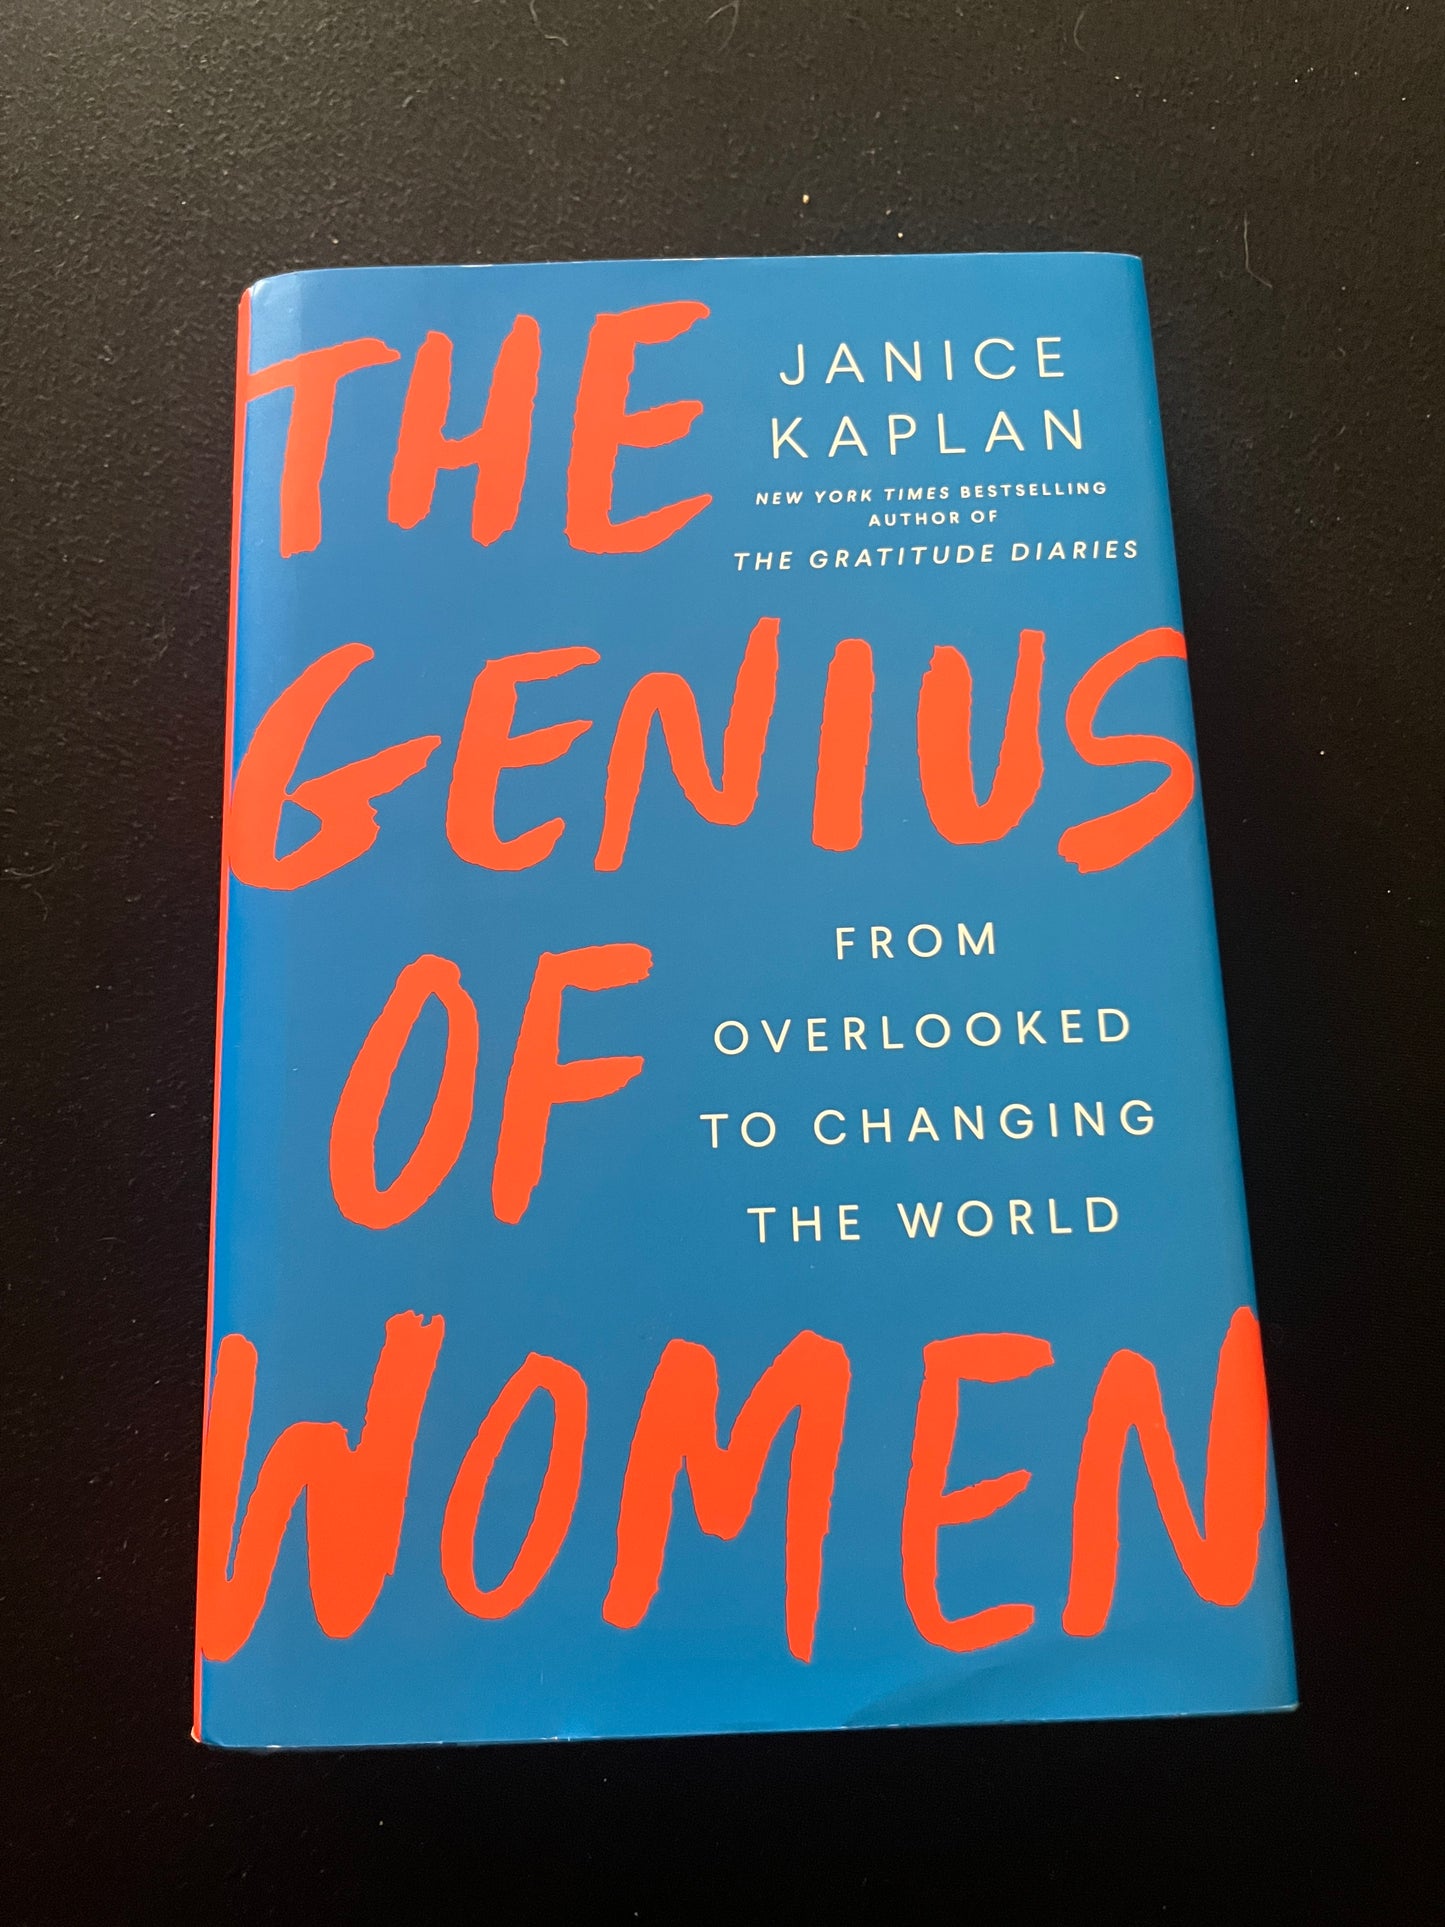 THE GENIUS OF WOMEN: From Overlooked to Changing the World by Janice Kaplan